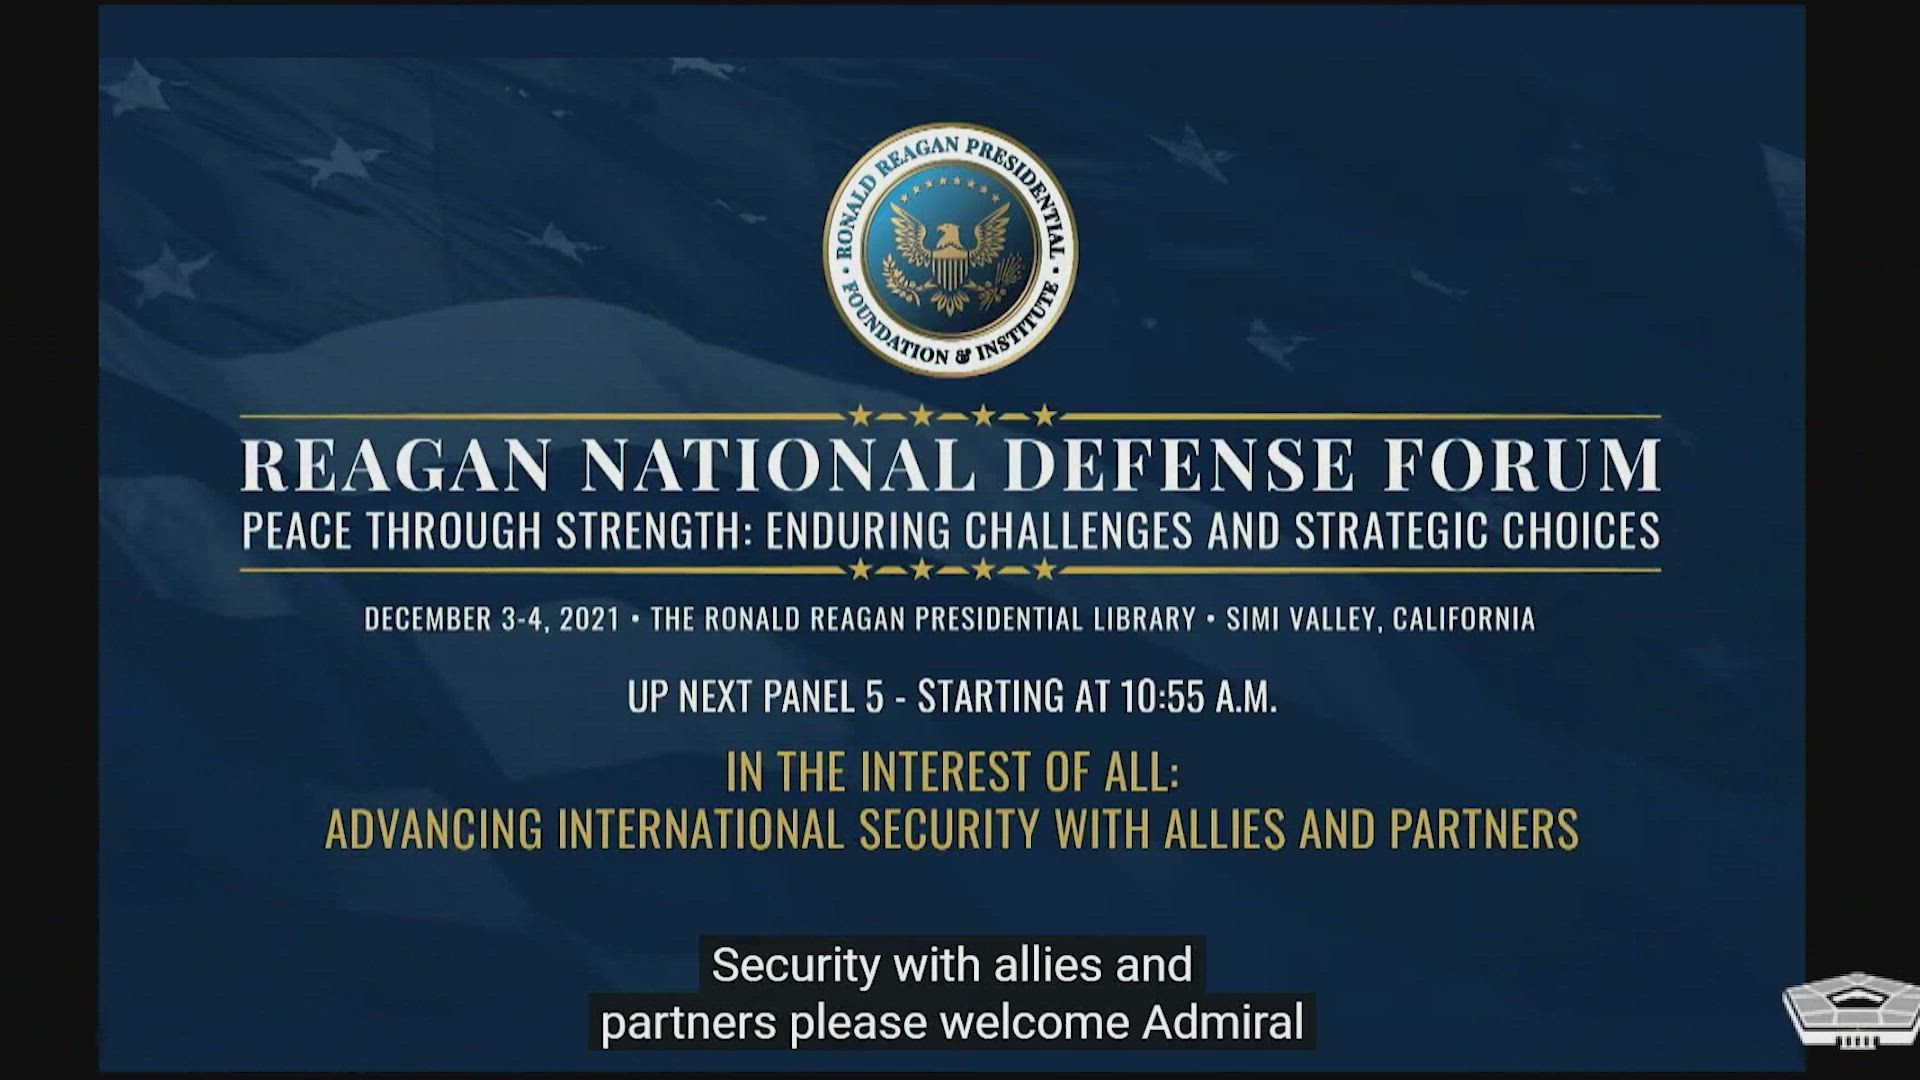 Navy Adm. John Aquilino, commander of U.S. Indo-Pacific Command, and Army Gen. Laura Richardson, commander U.S. Southern Command, participate in a panel discussion on international security at the Reagan National Defense Forum. The forum offers the defense community a chance to discuss and debate how the United States can lead the world in an era of increasingly complex challenges and opportunities.